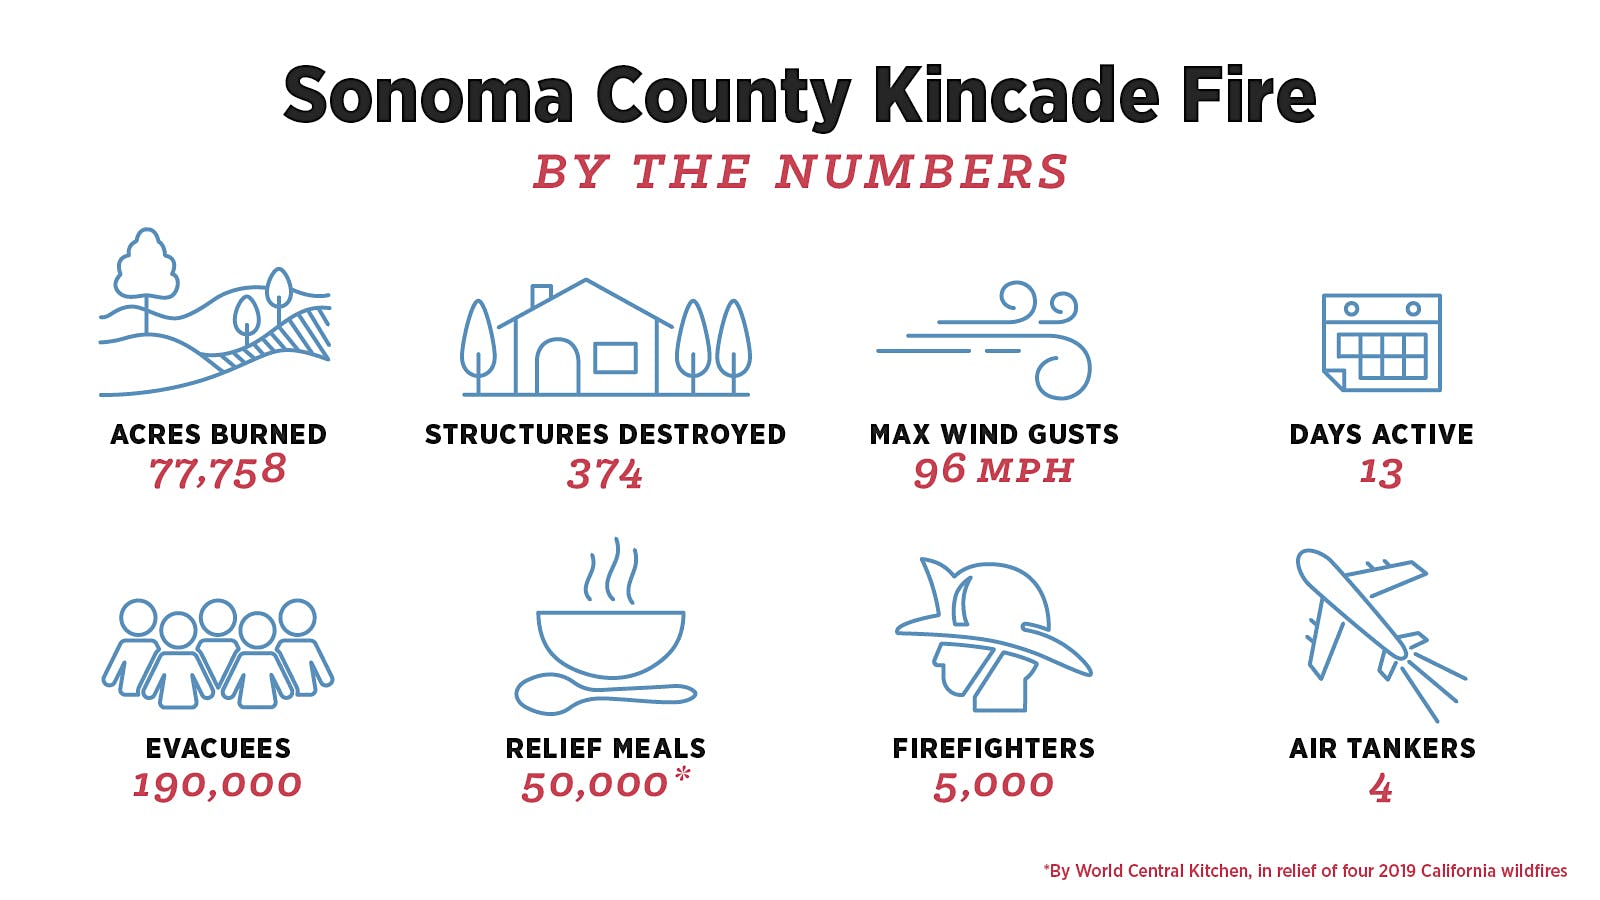 Kincade Fire by the numbers infographic